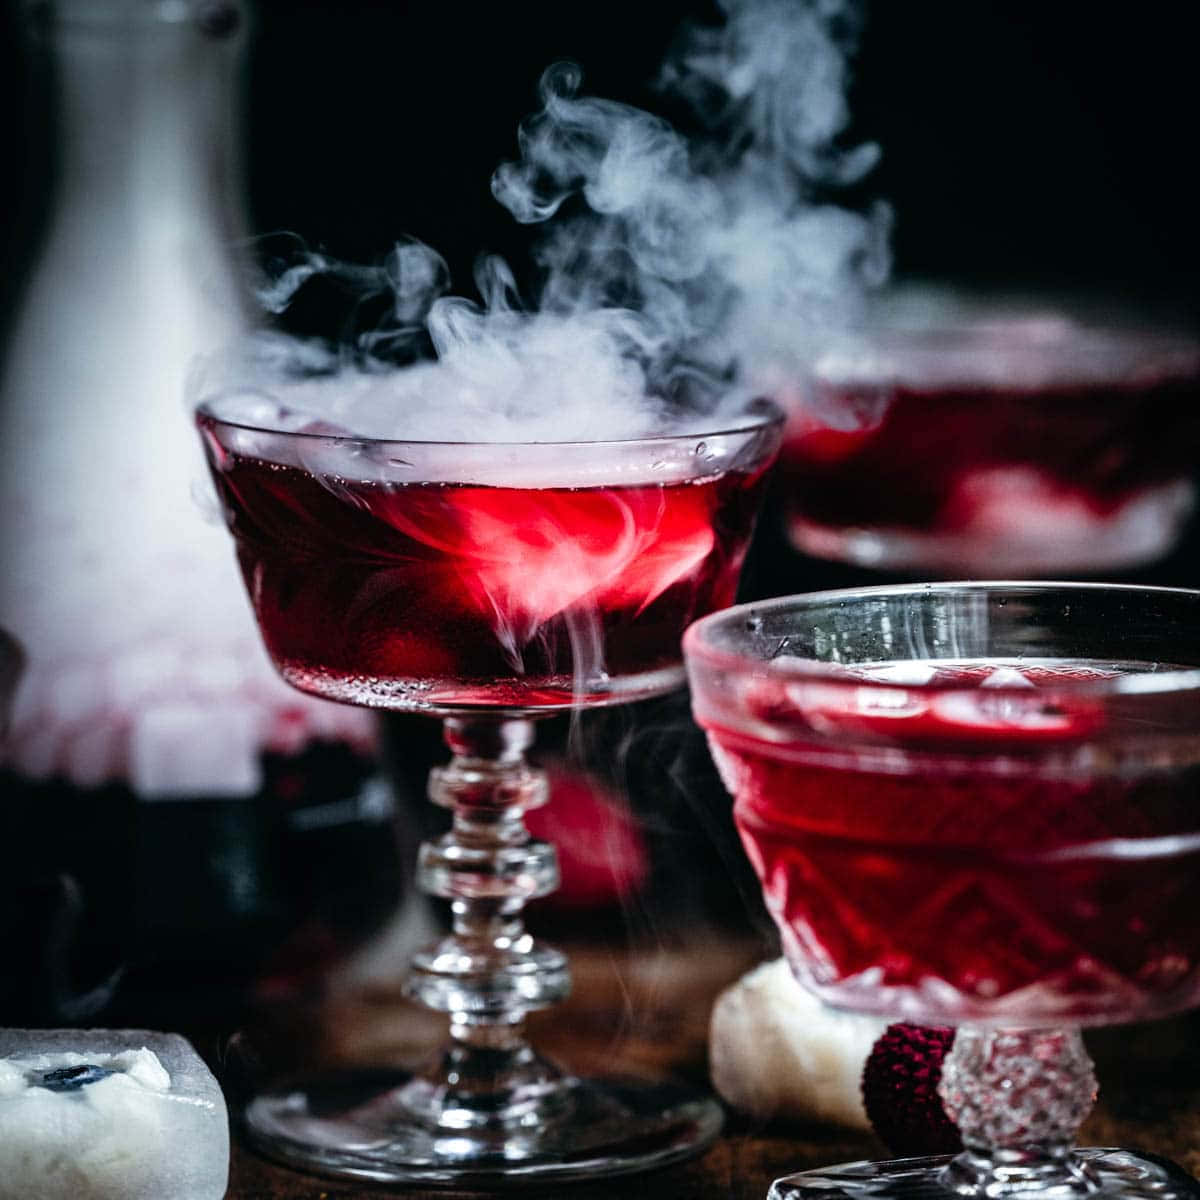 Enjoy a spooky Halloween season with these eerie yet delicious cocktails! Wallpaper